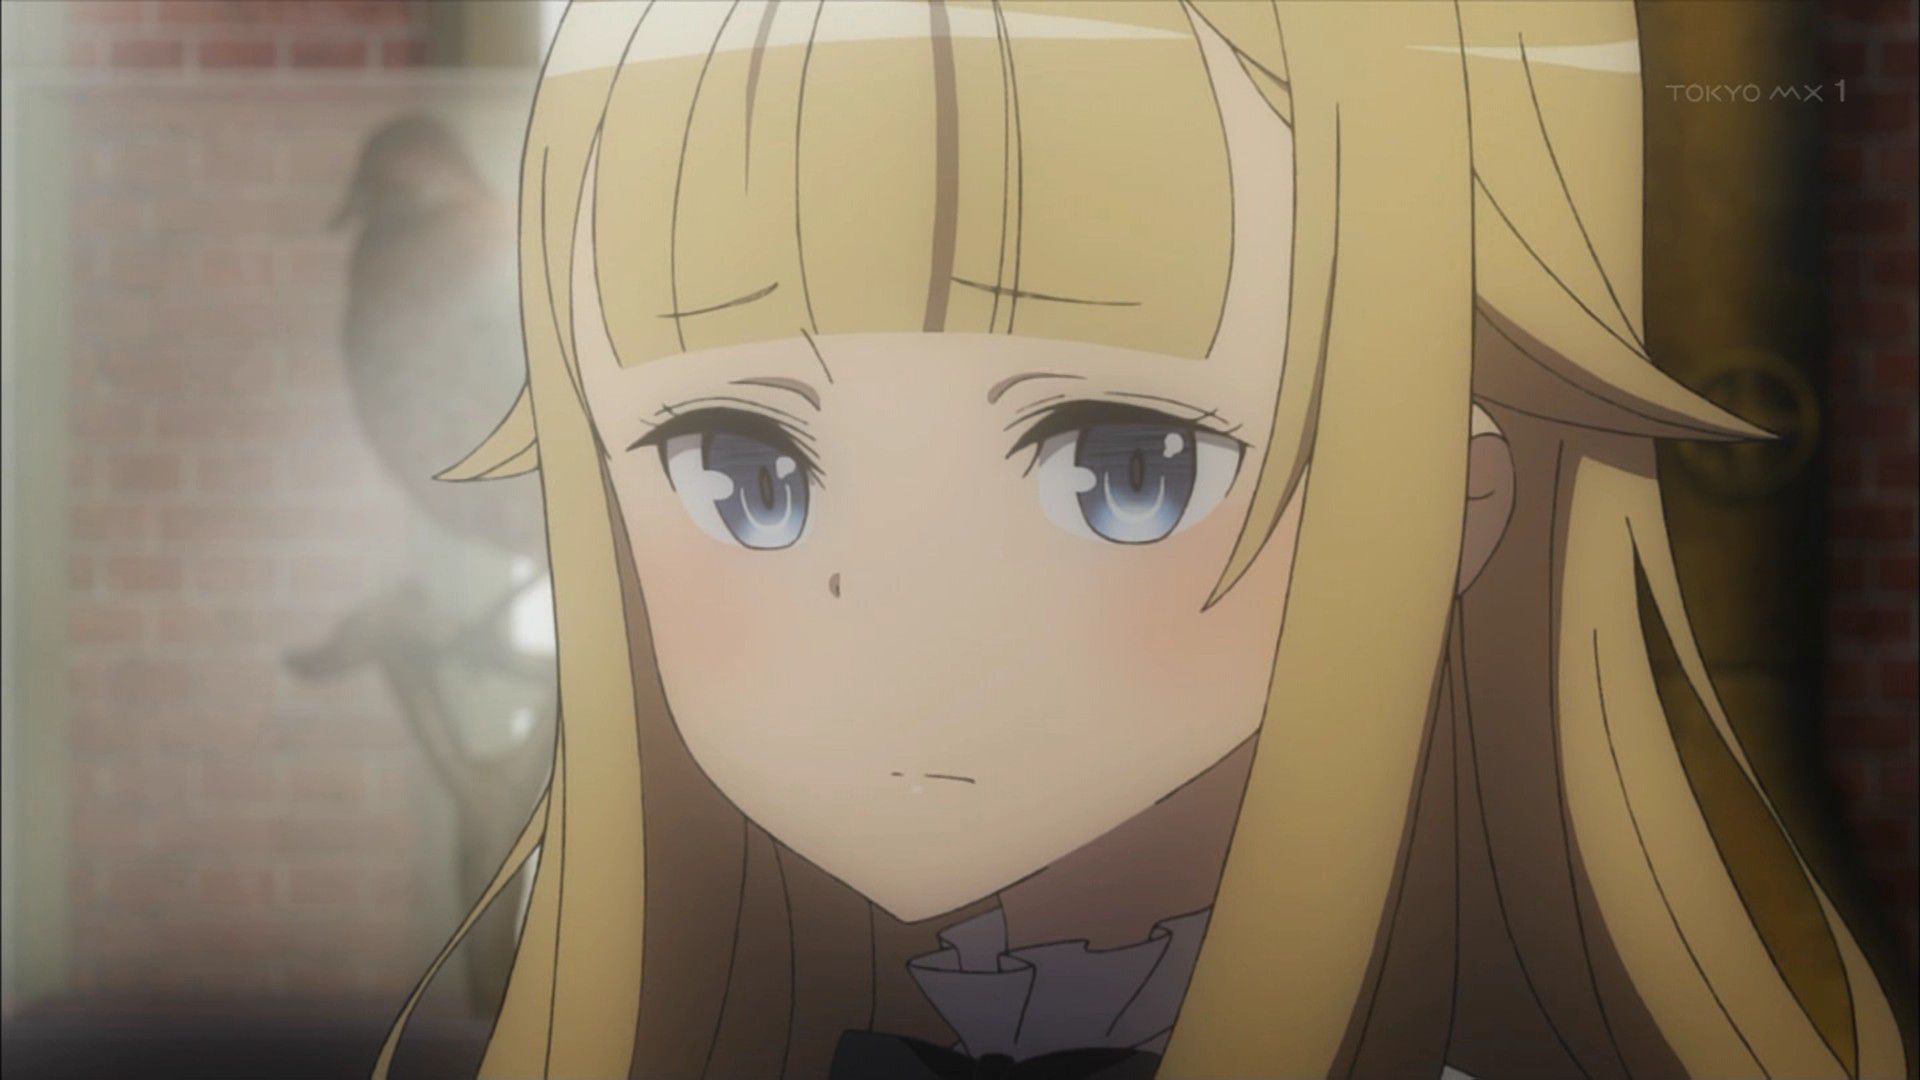 The Princess Principal 3 story, a little voice sounded, but I forgave the last bold confession 6